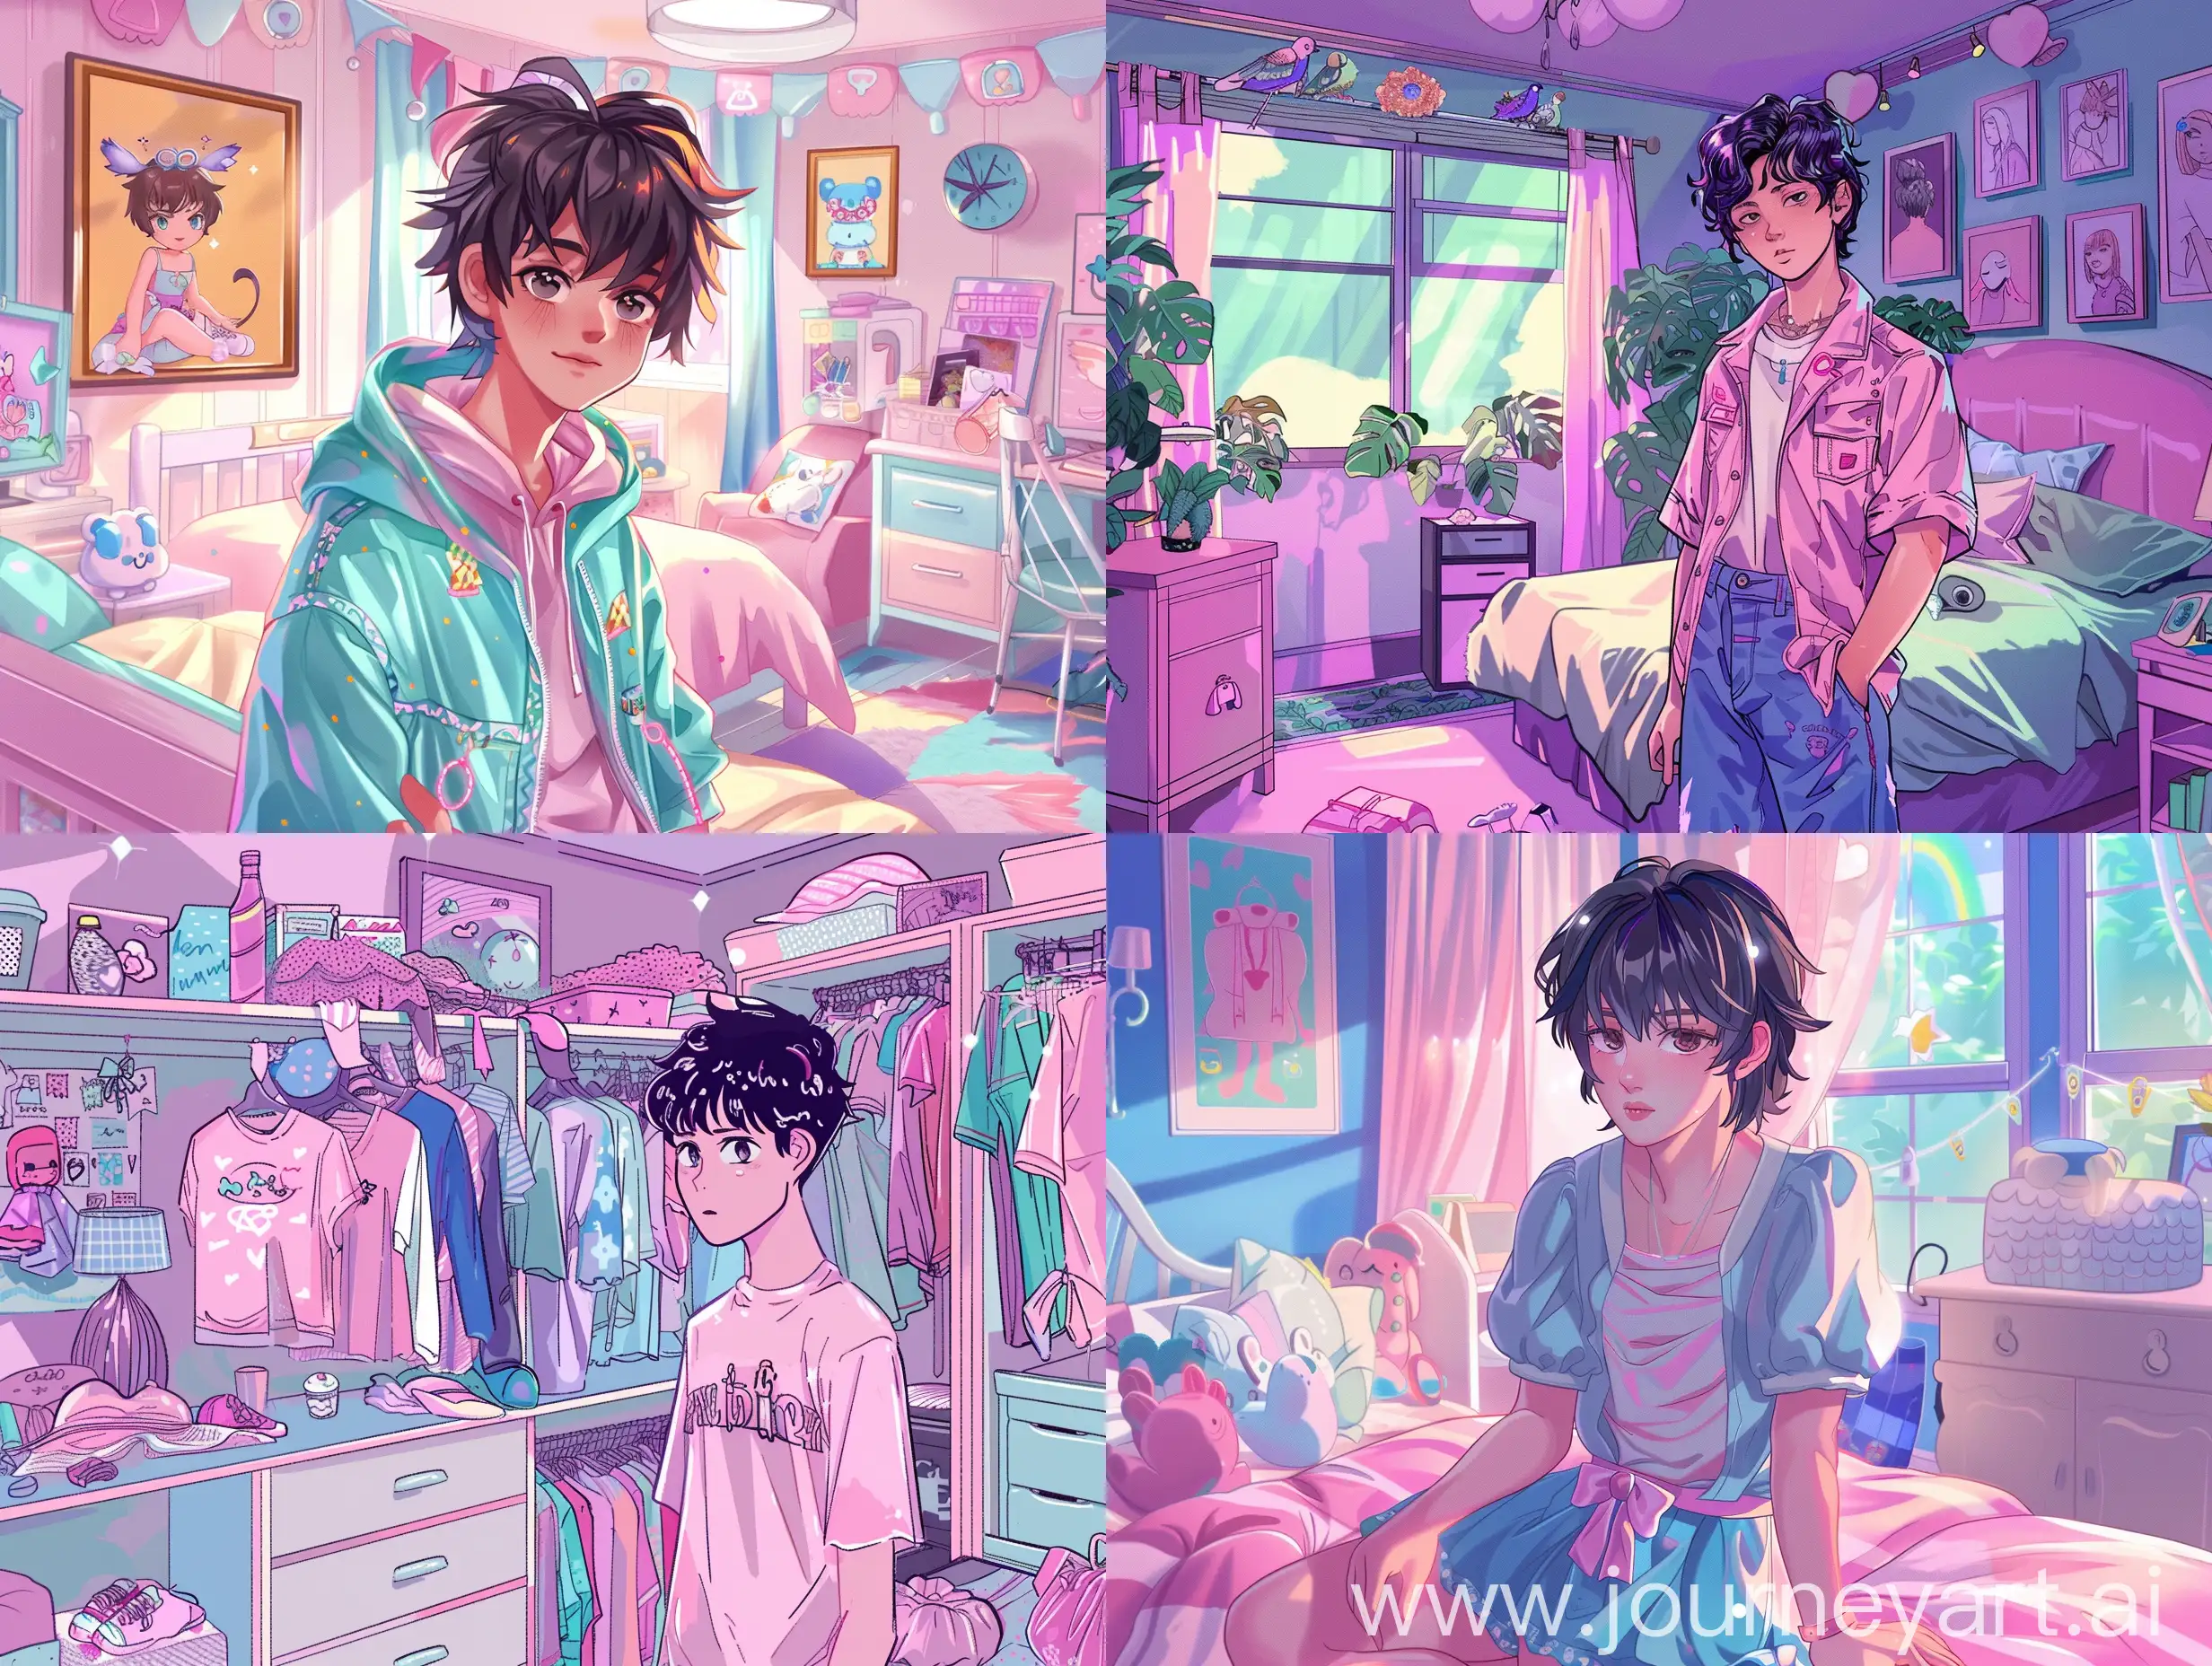 boy wearing girly clothes in a girly room, anime style